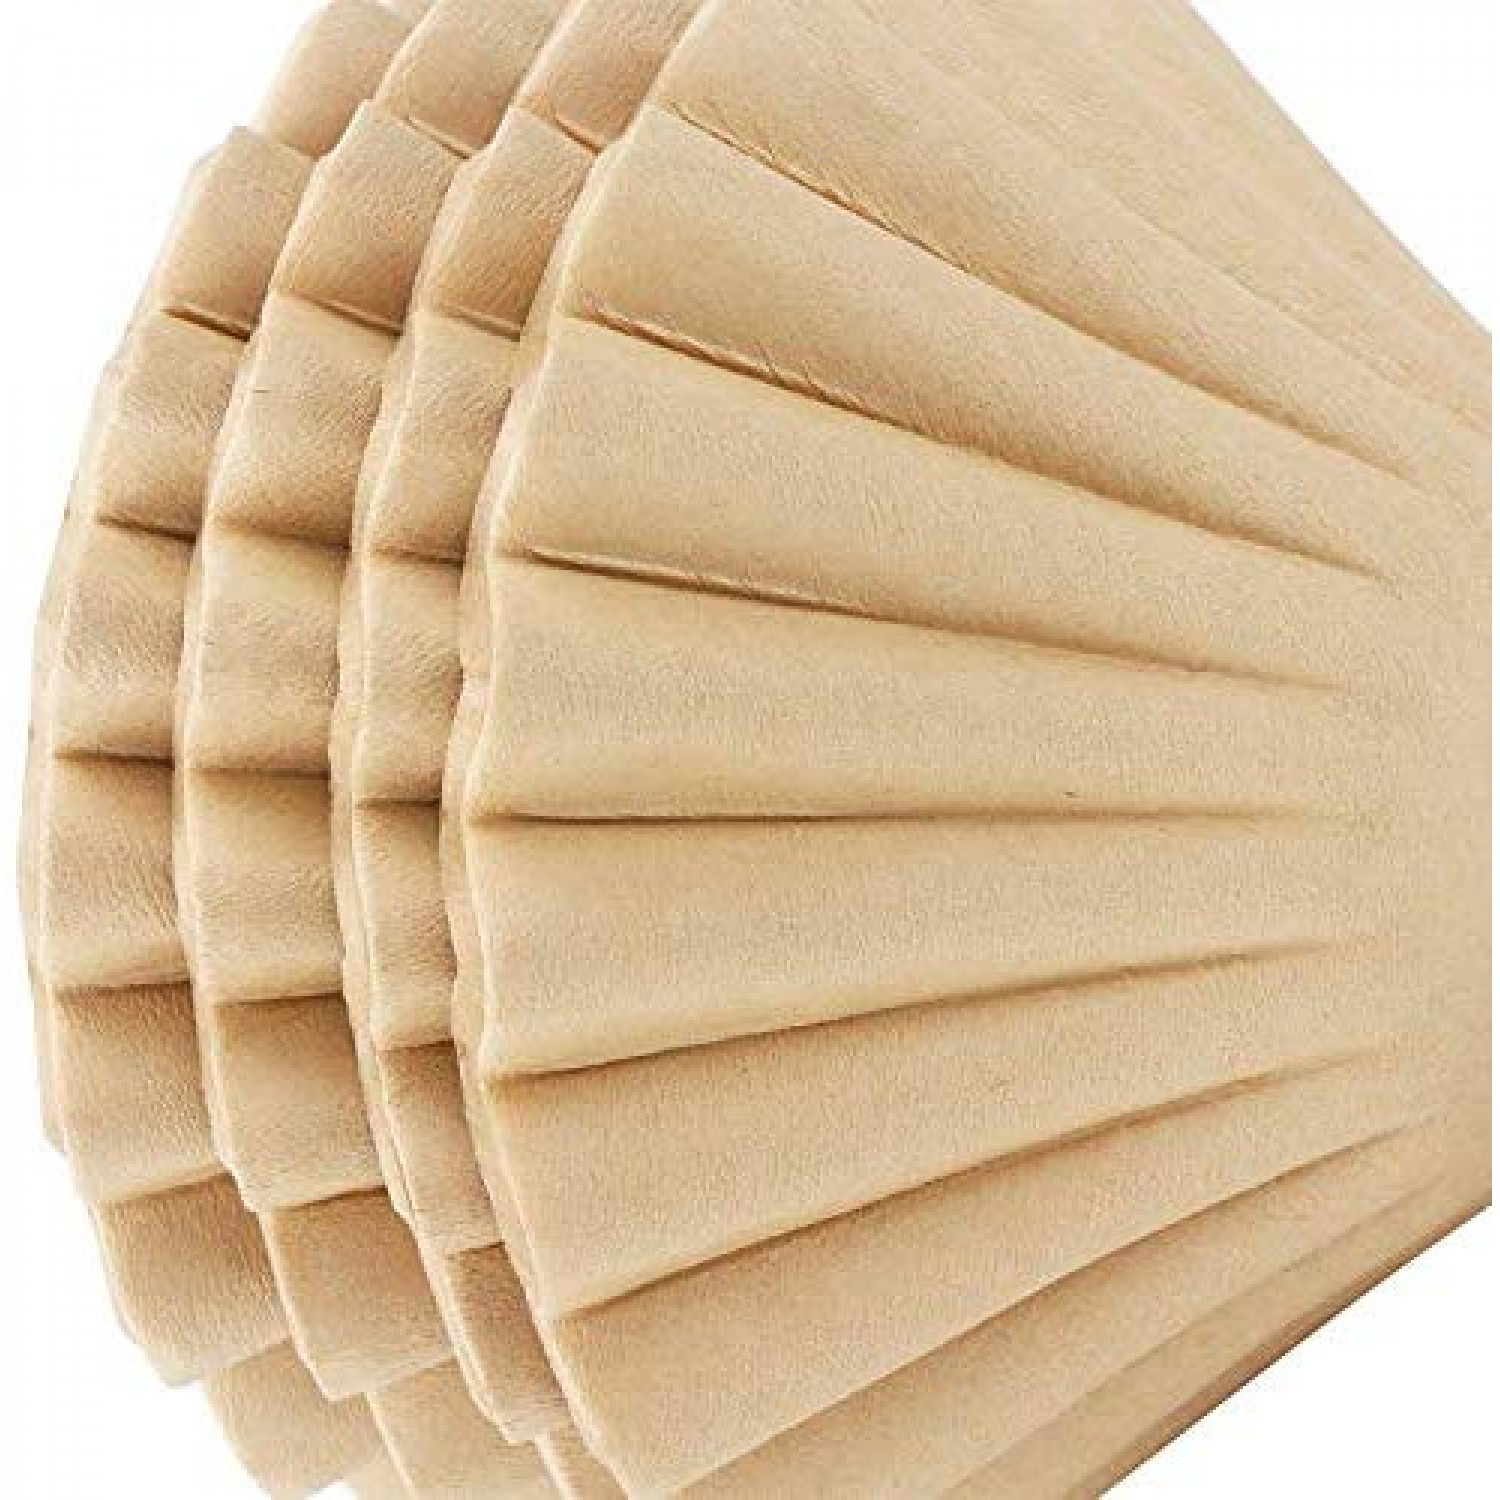 EUSOAR 1-4 Cup Disposable Coffee Filters, 100 count Filter Replacement,  Natural Brown Unbleached, fit small Basket Style Single Serve Coffee  Makers